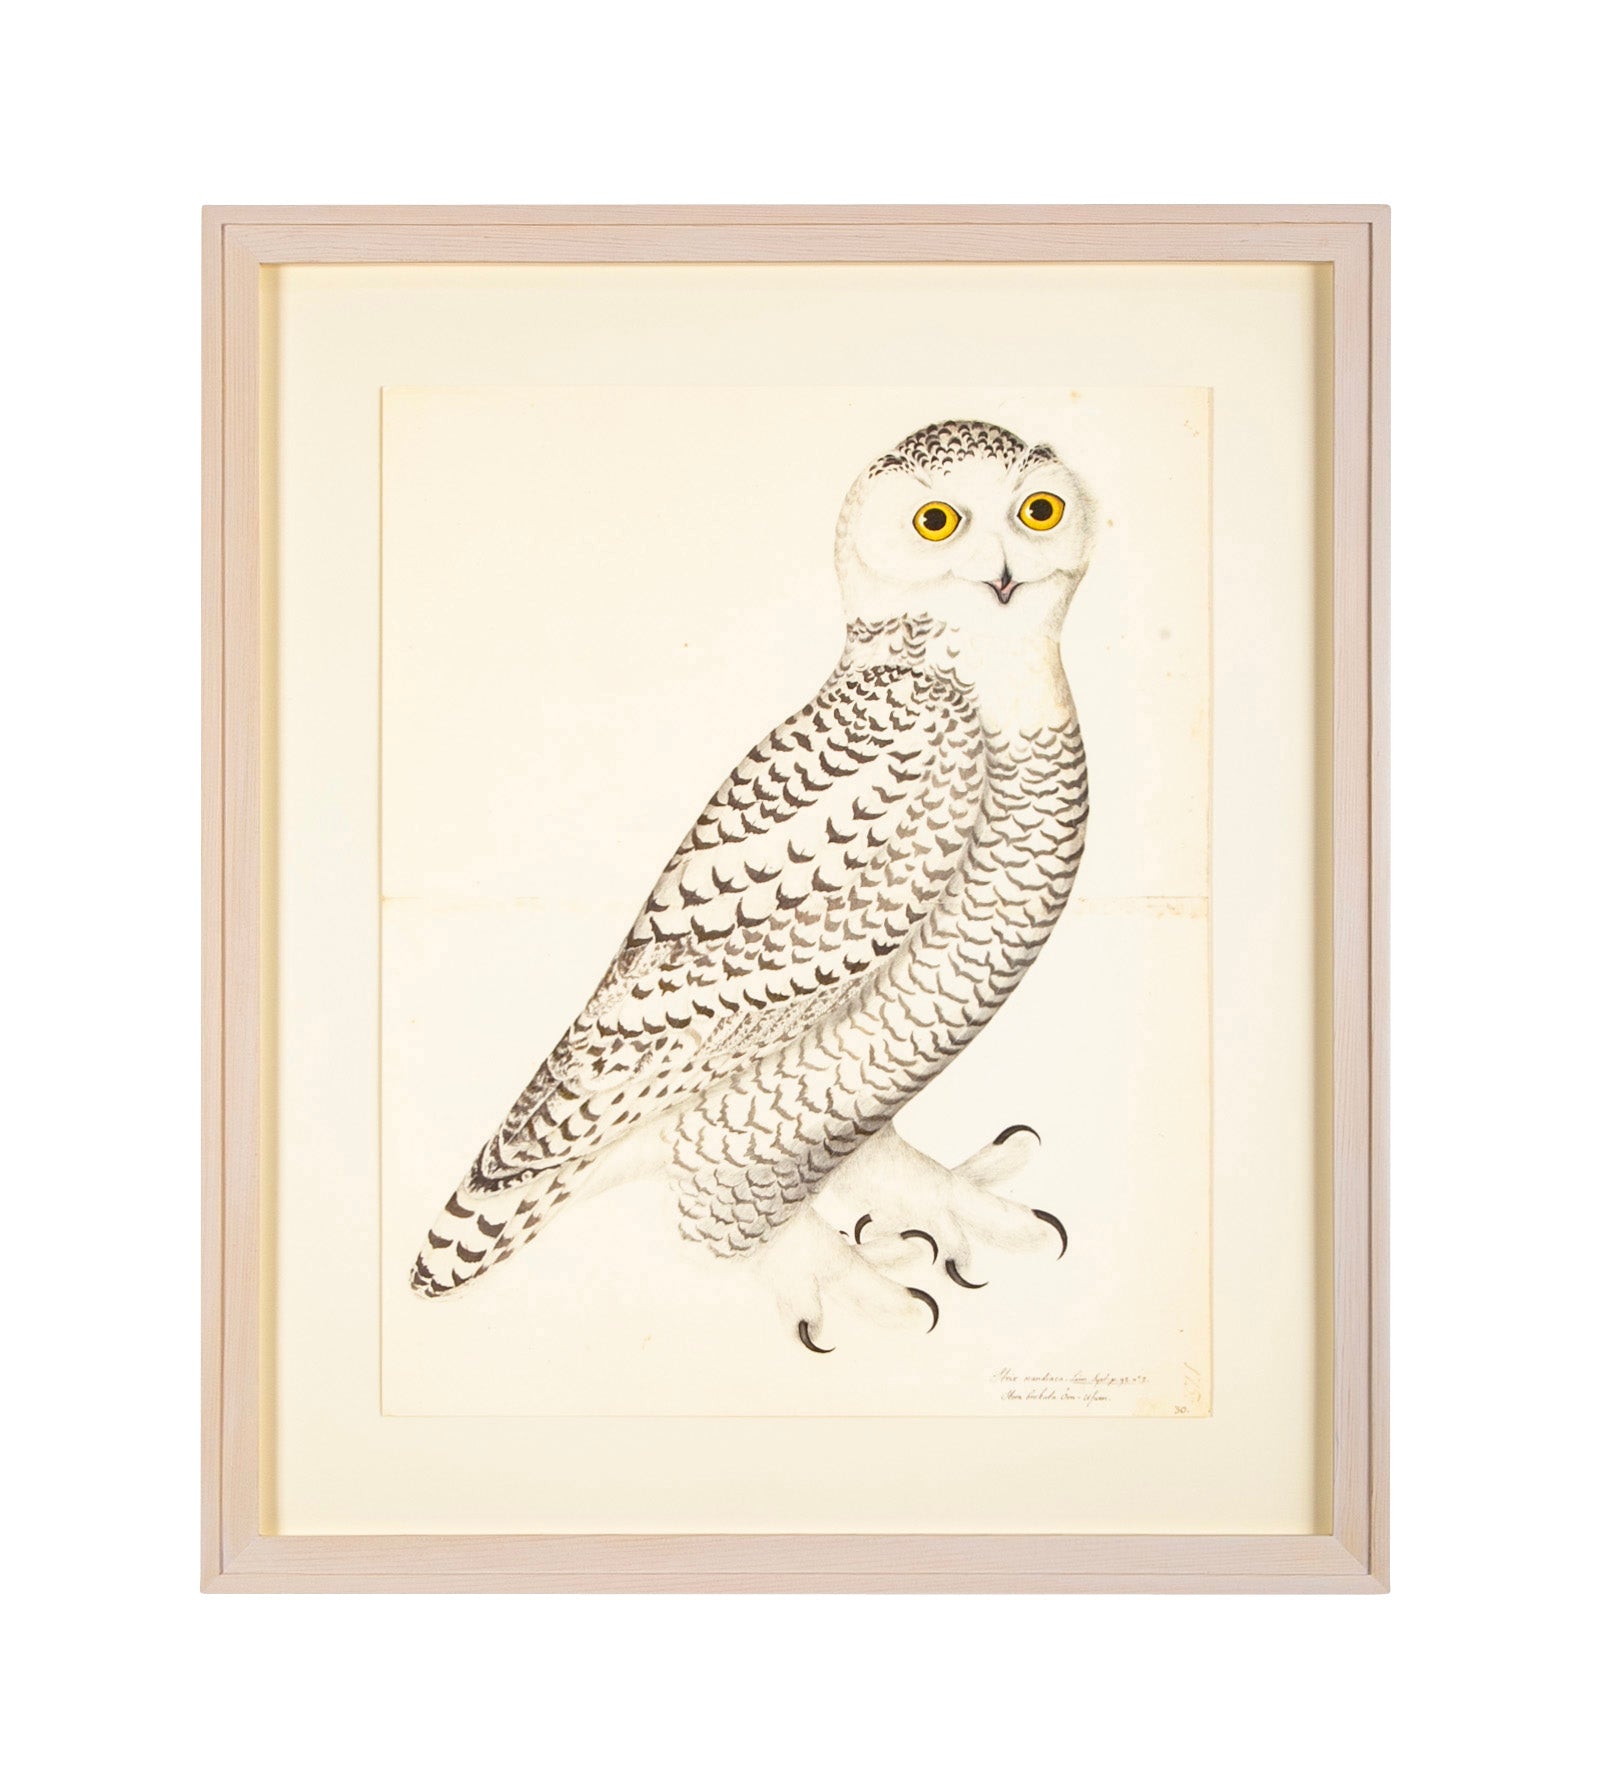 Offset Lithograph of "Snowy Owl, Juvenile Male, PL 30" from the "The Great Bird Book" by Olof Rudbeck The Younger (1660-1740)